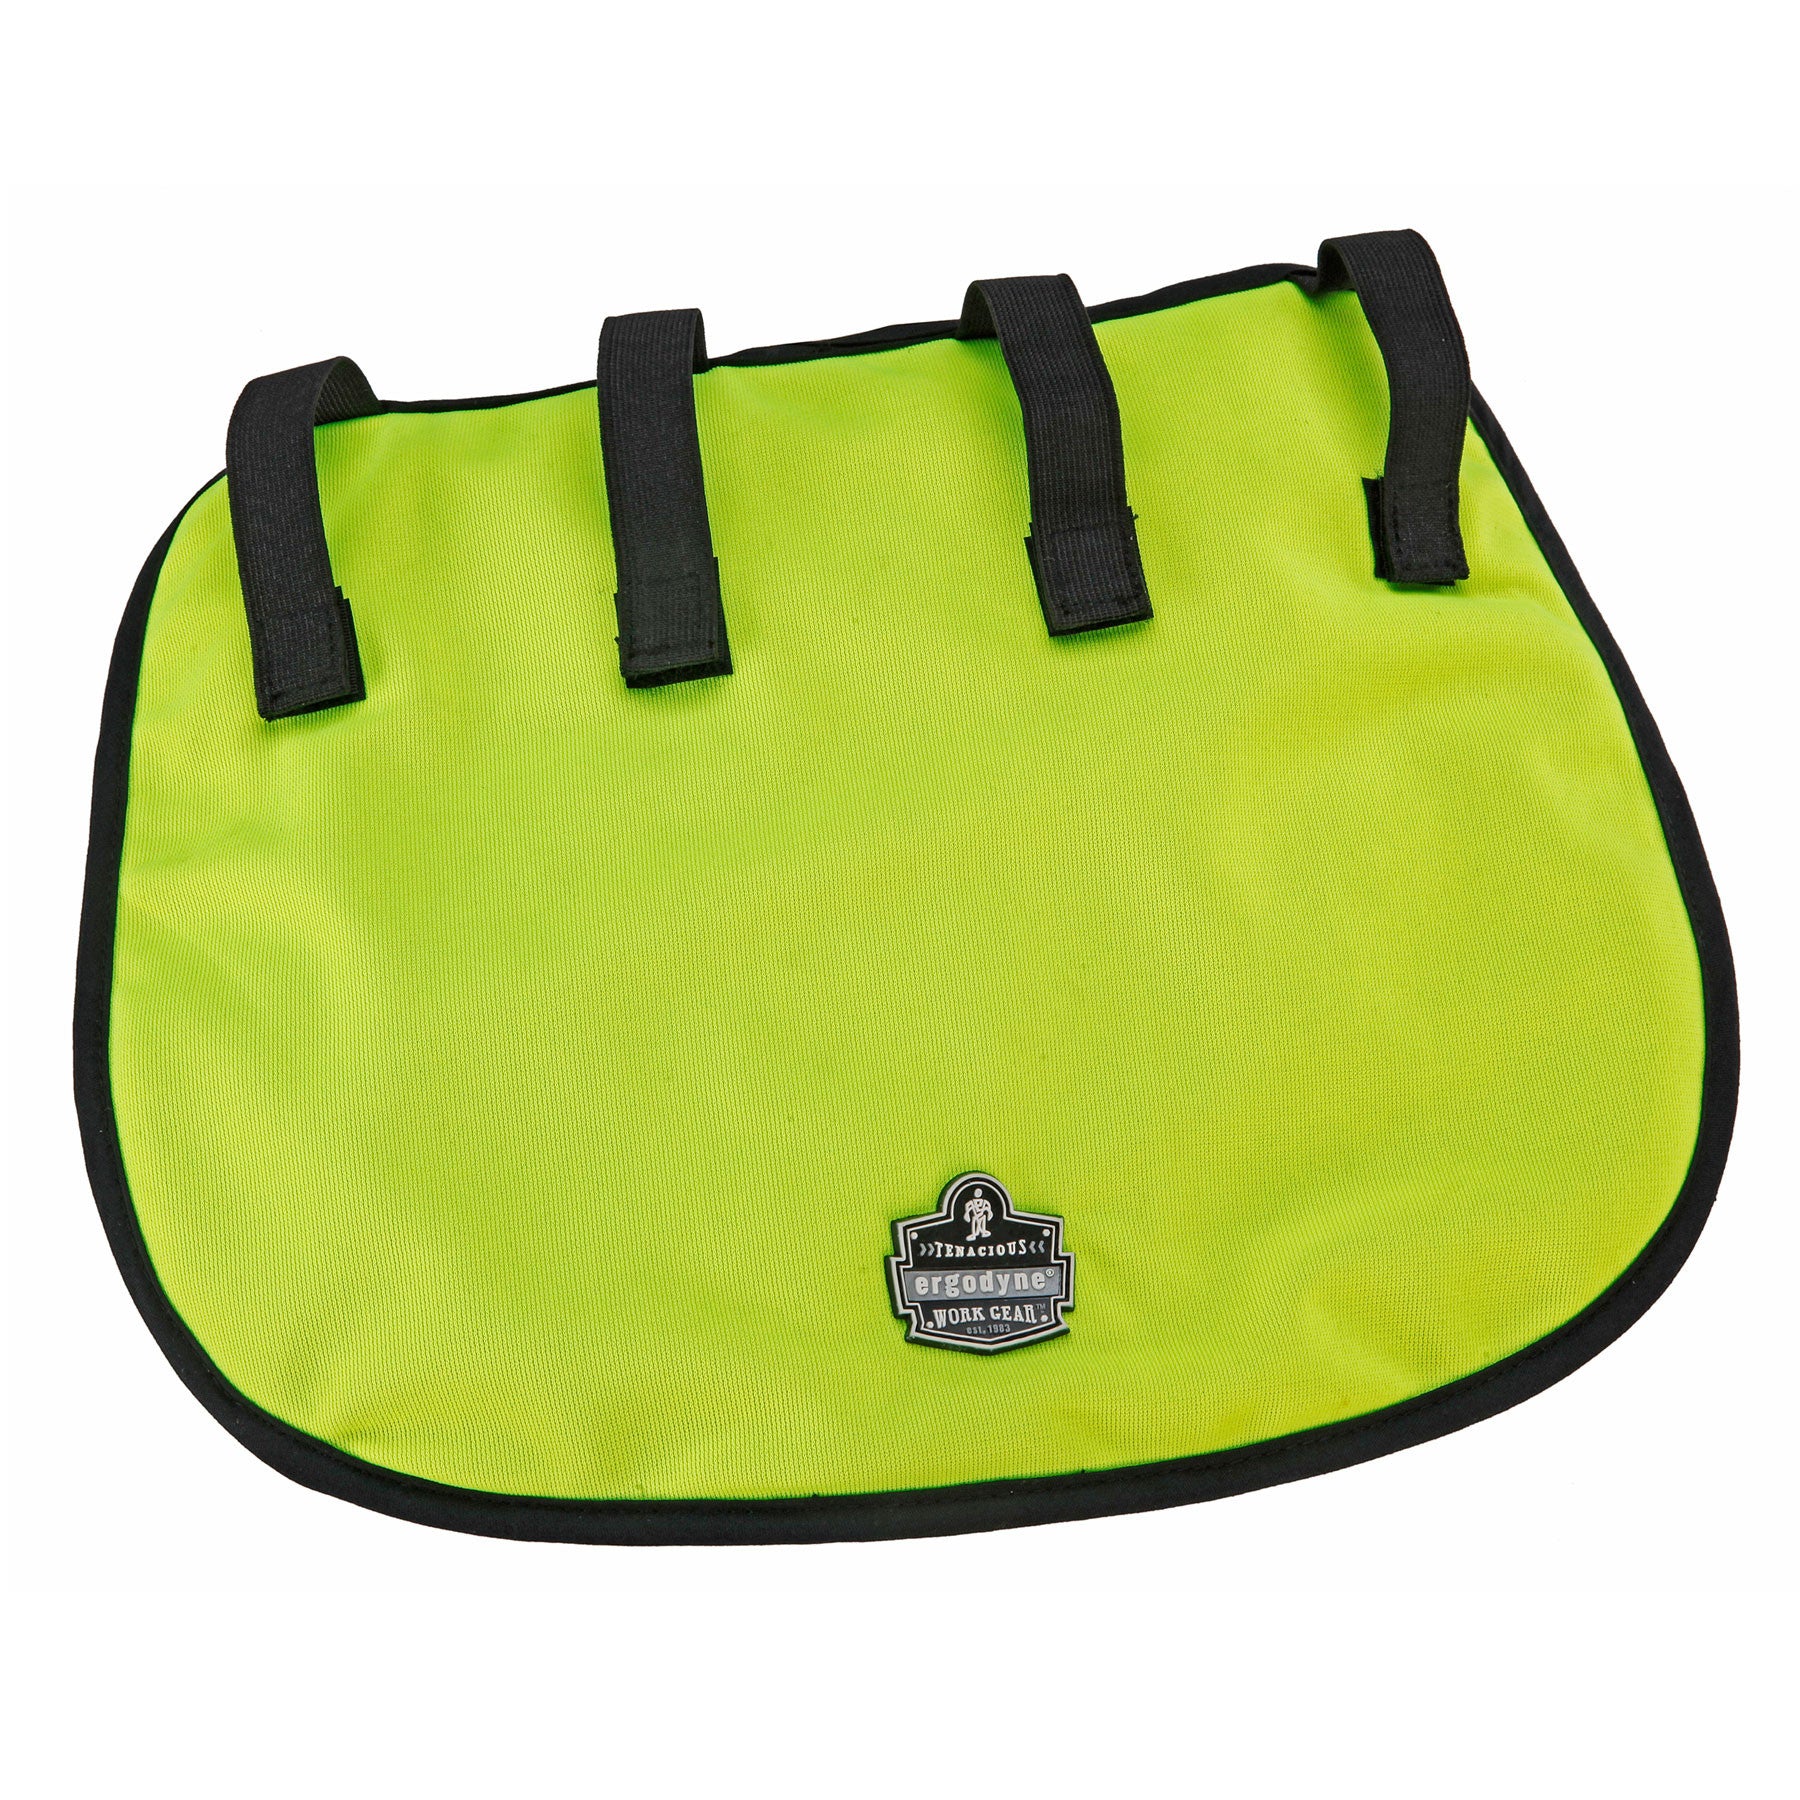 Ergodyne Hi-Viz Lime Chill-Its 6670Ct Advanced Pva Evaporative Neck Shade With Hook And Loop Straps-eSafety Supplies, Inc